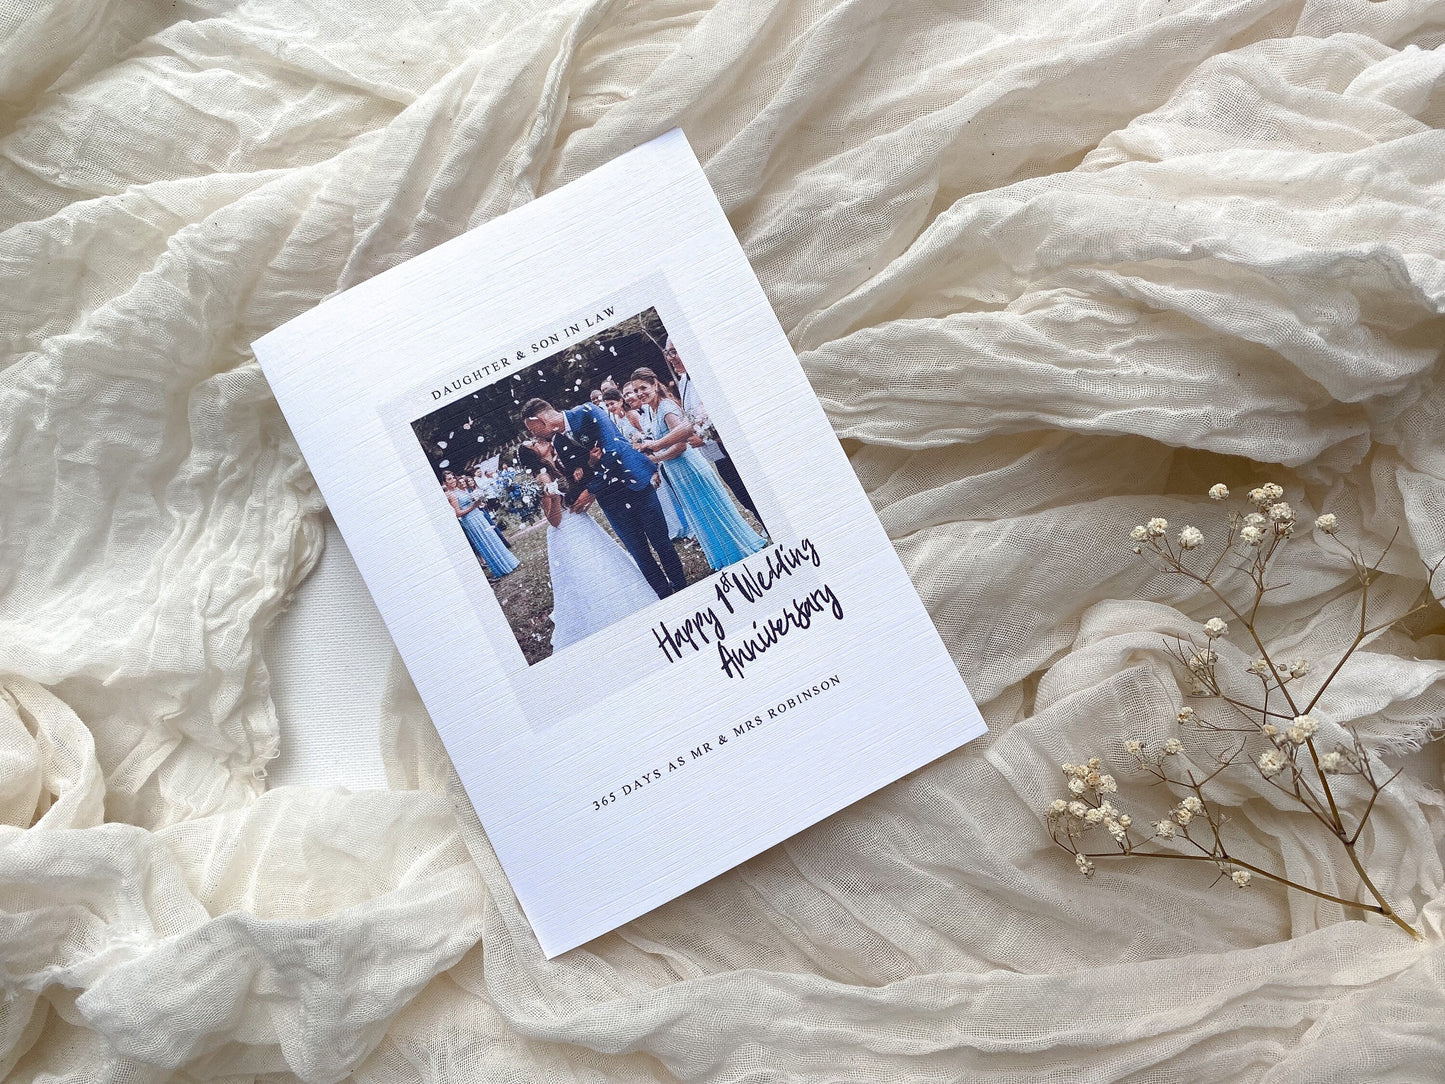 Happy wedding anniversary son and daughter in law,happy 1st wedding anniversary, happy first wedding anniversary, daughter and son in law. Relation wedding anniversary, personalised wedding Anniversary card, Polaroid style photo anniversary card . 365 days and husband and wife , 365 days married 